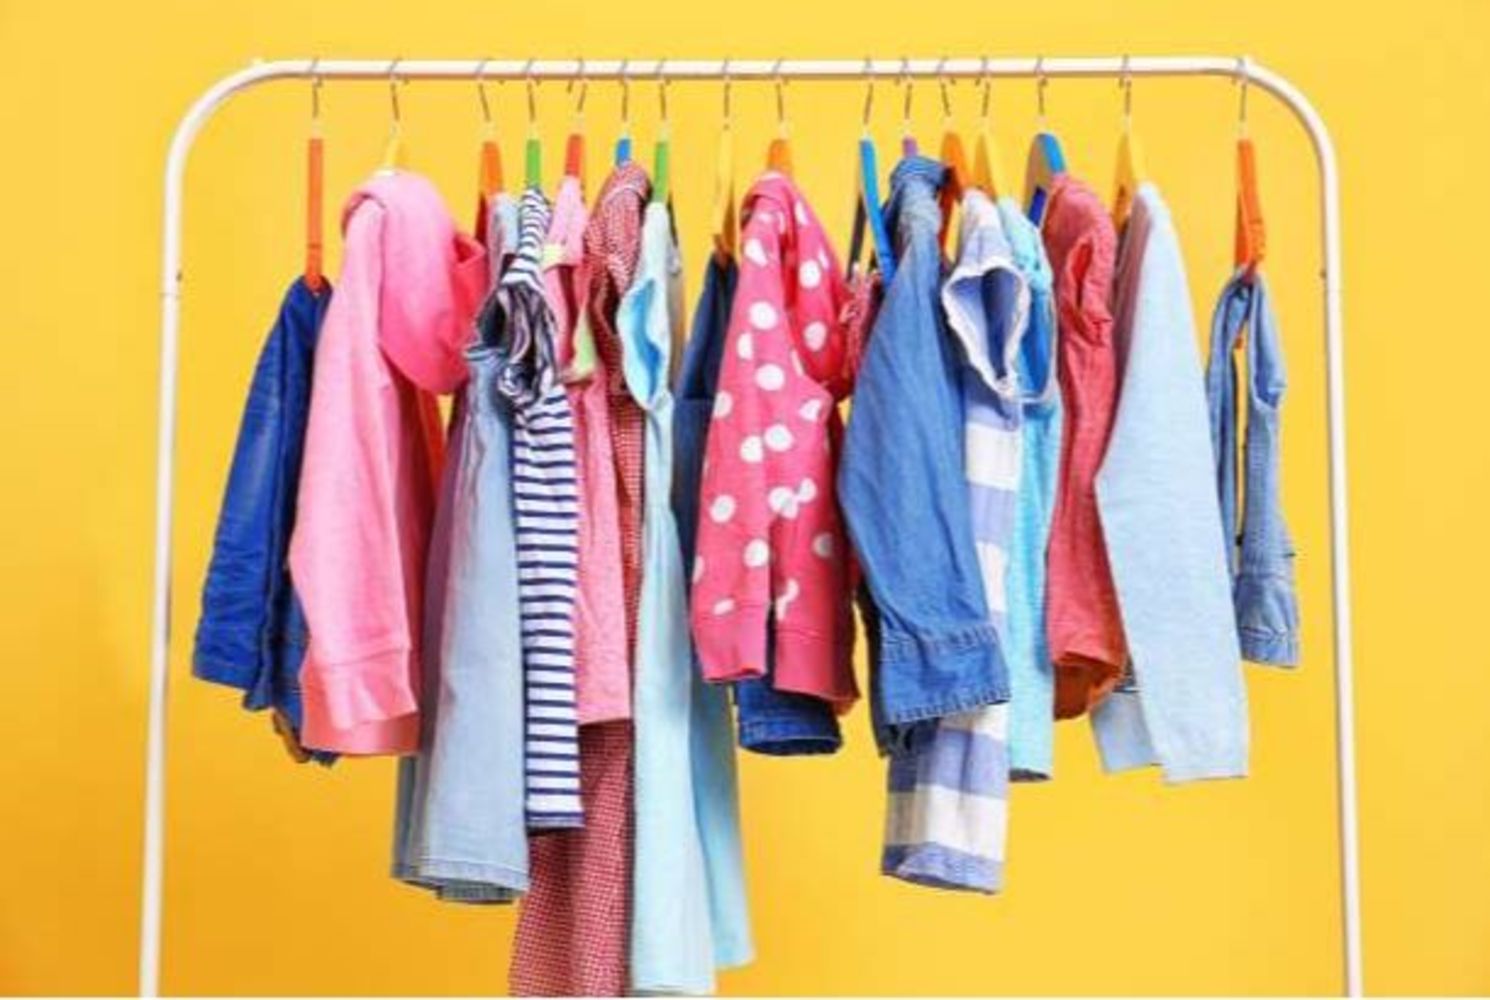 Textiles & Clothing to include Branded Footwear, Bedding, Curtains and Towels